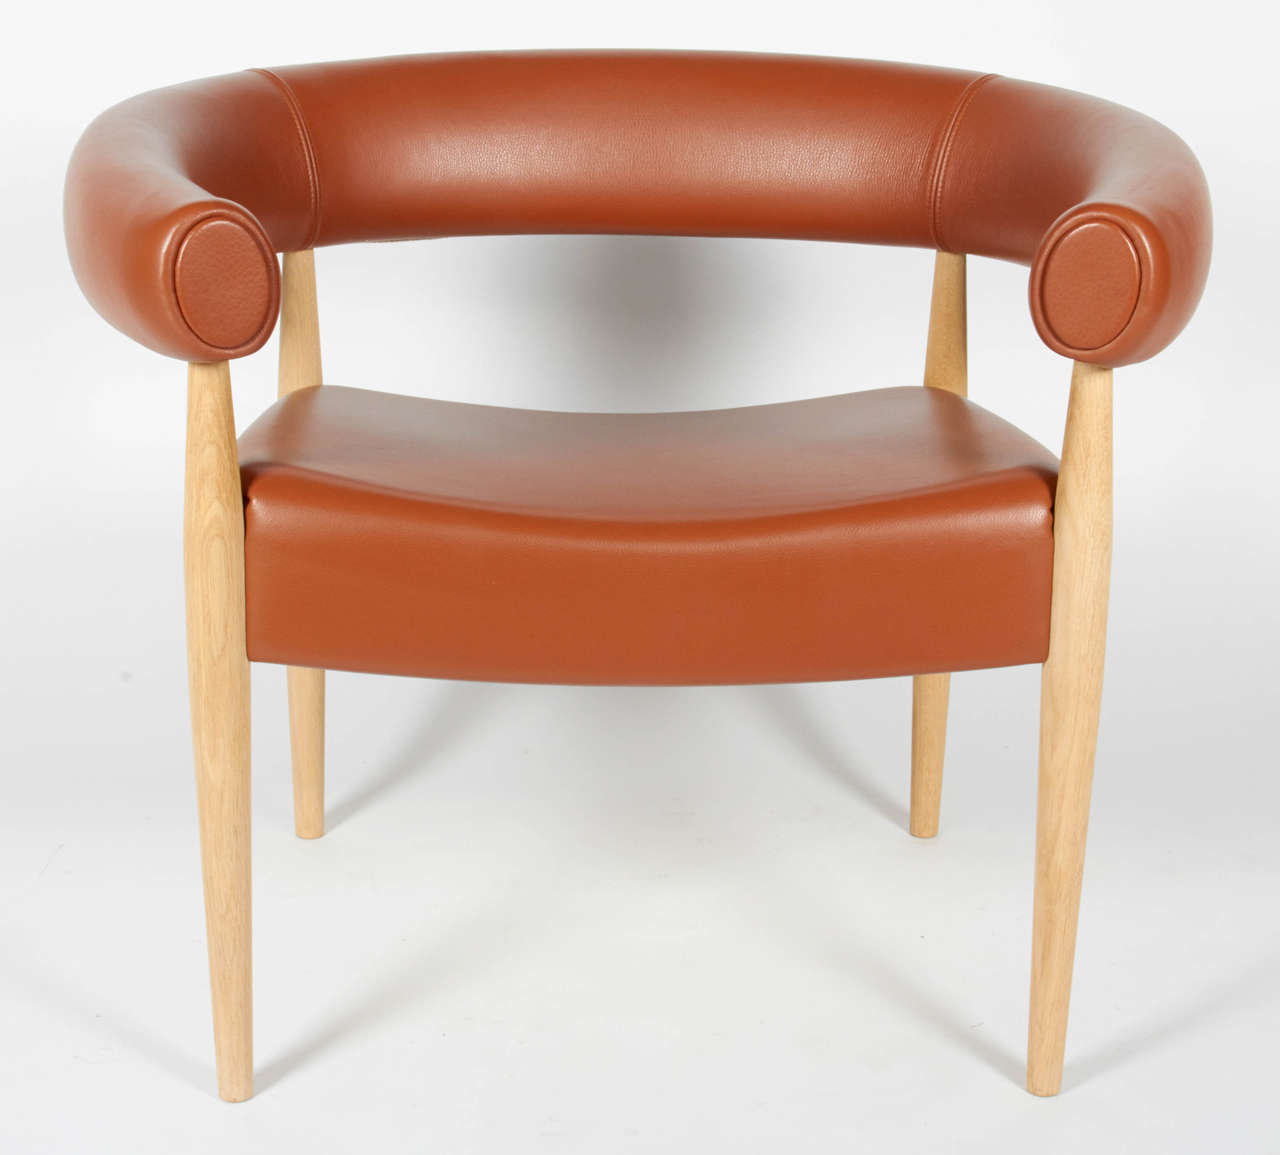 A wonderful and exceptionally comfortable pair of lounge chairs by Nanna Ditzel. The original design is from 1958, Denmark. This pair has been reupholstered in the not so distant past. The upholstery is a beautiful Italian ochre leather.